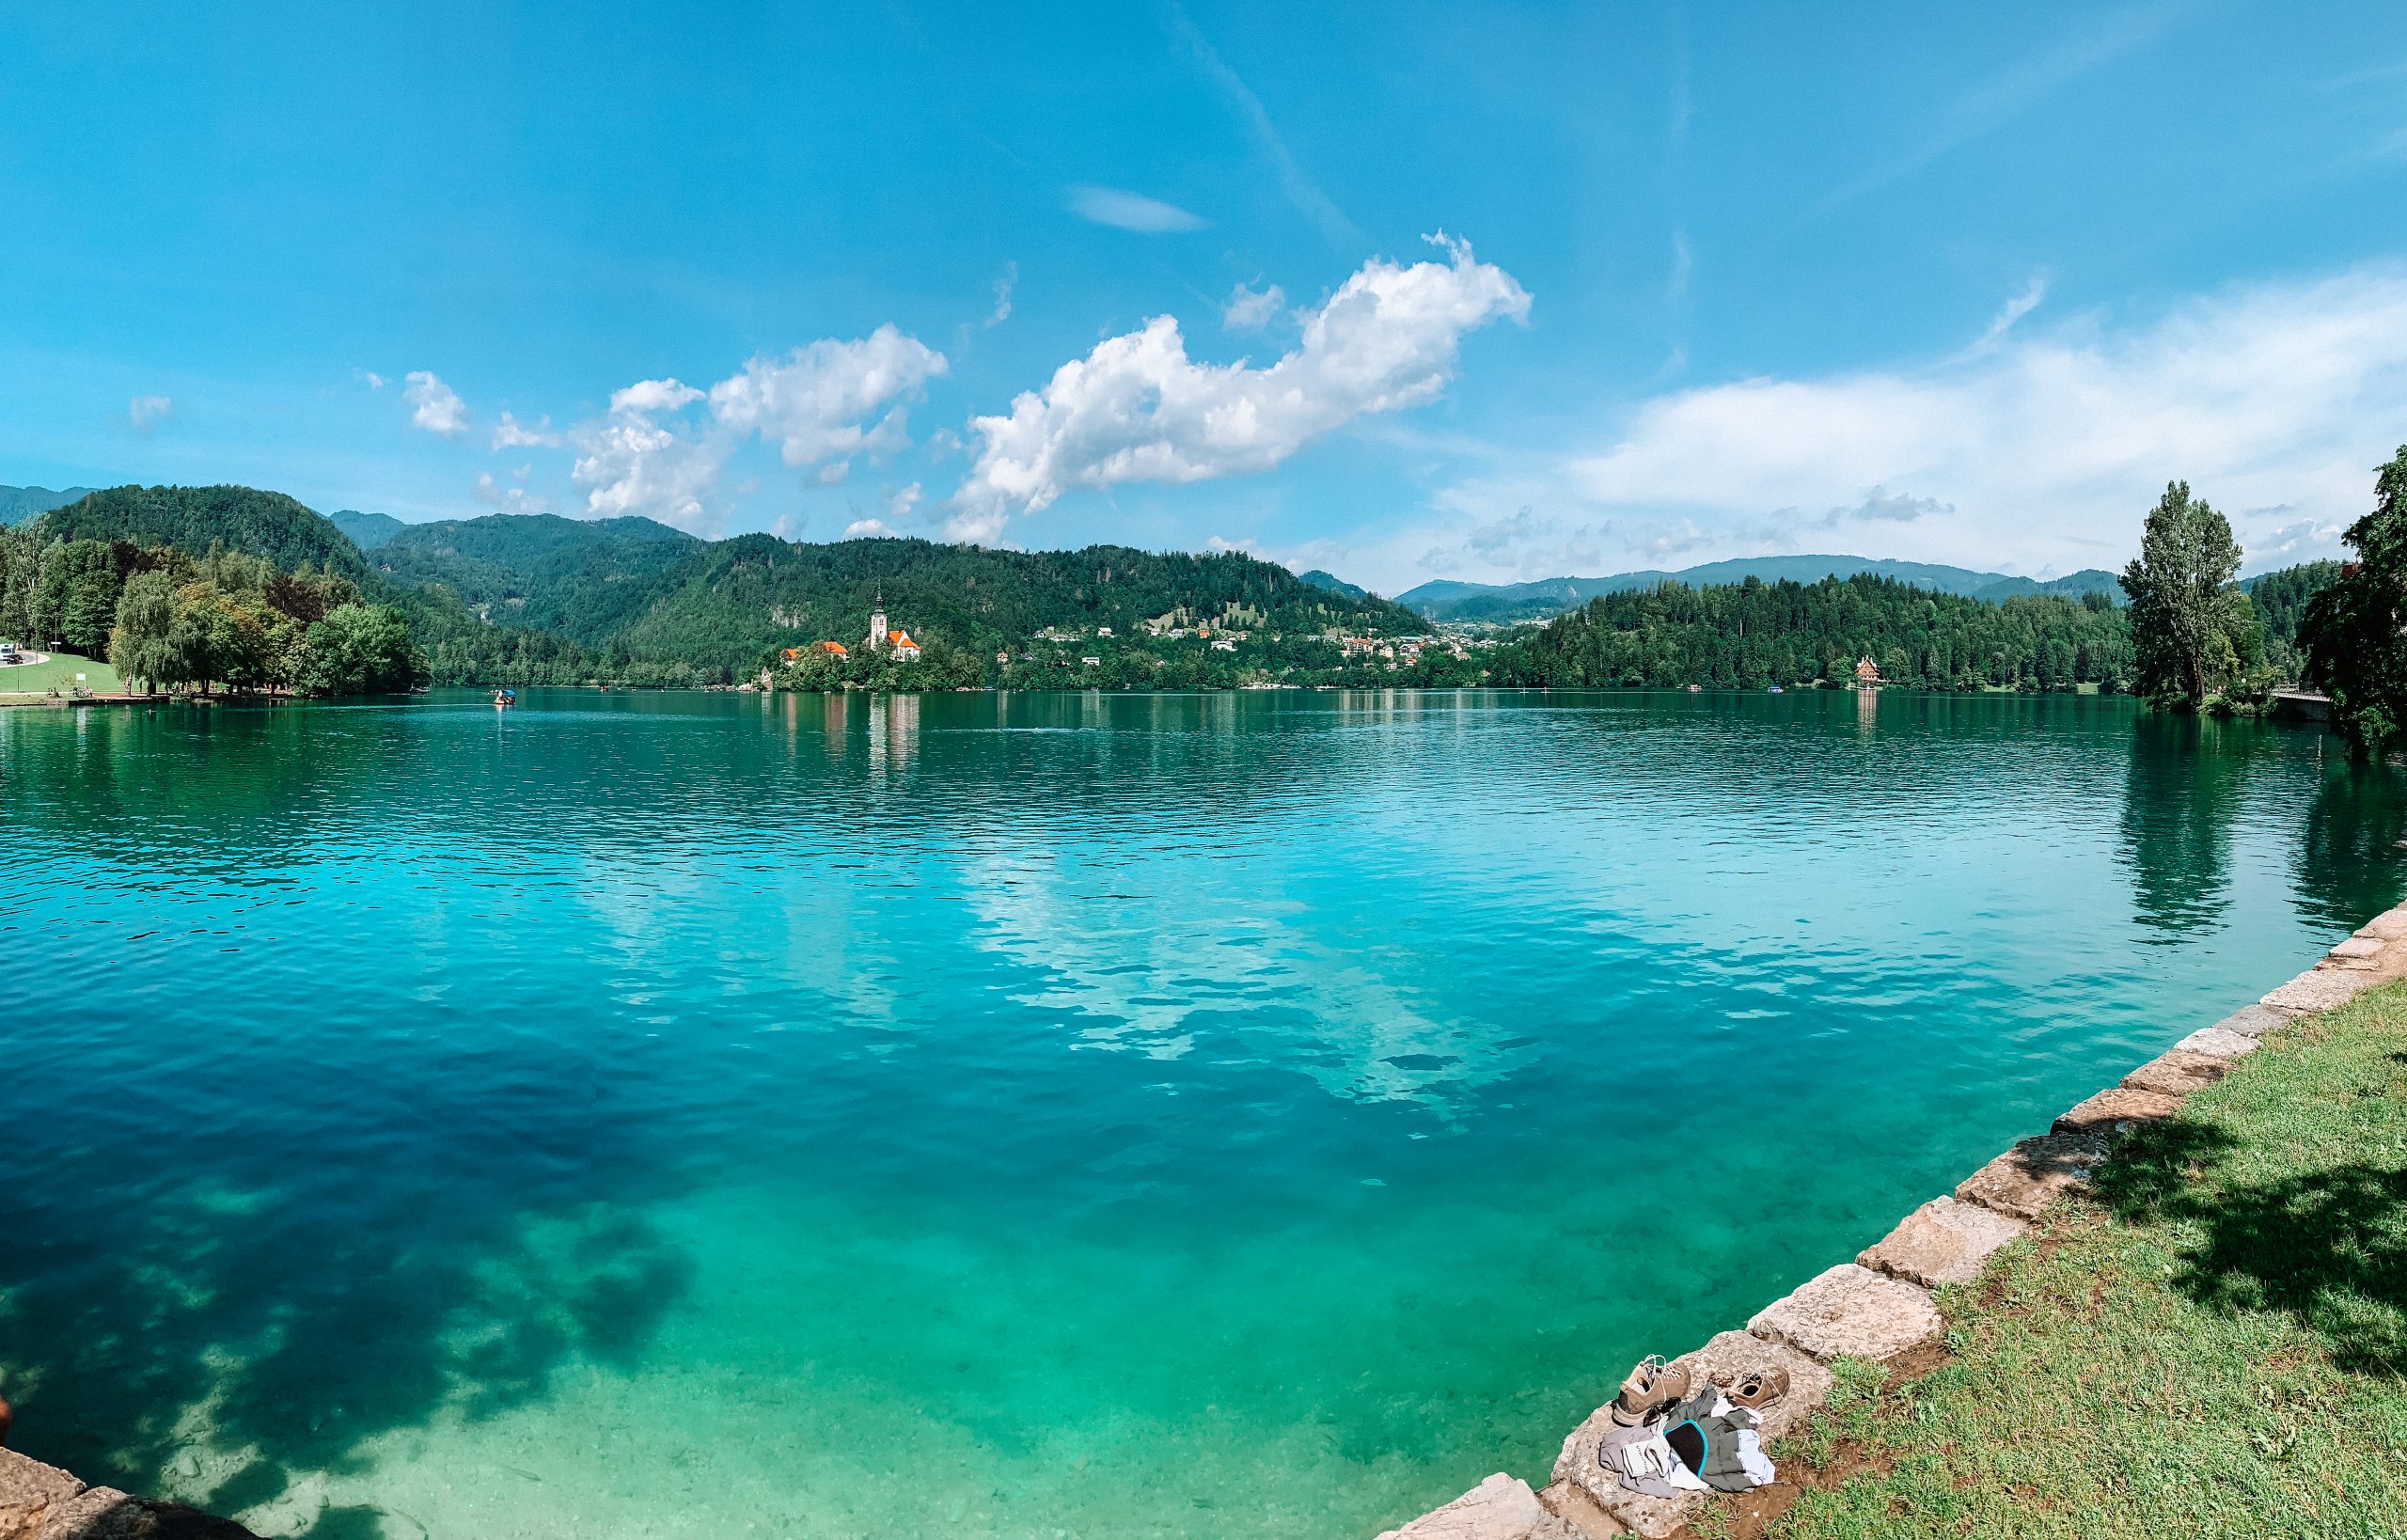 A wide angle view of Lake Bled and its surrounding areas with hills and an island in the background